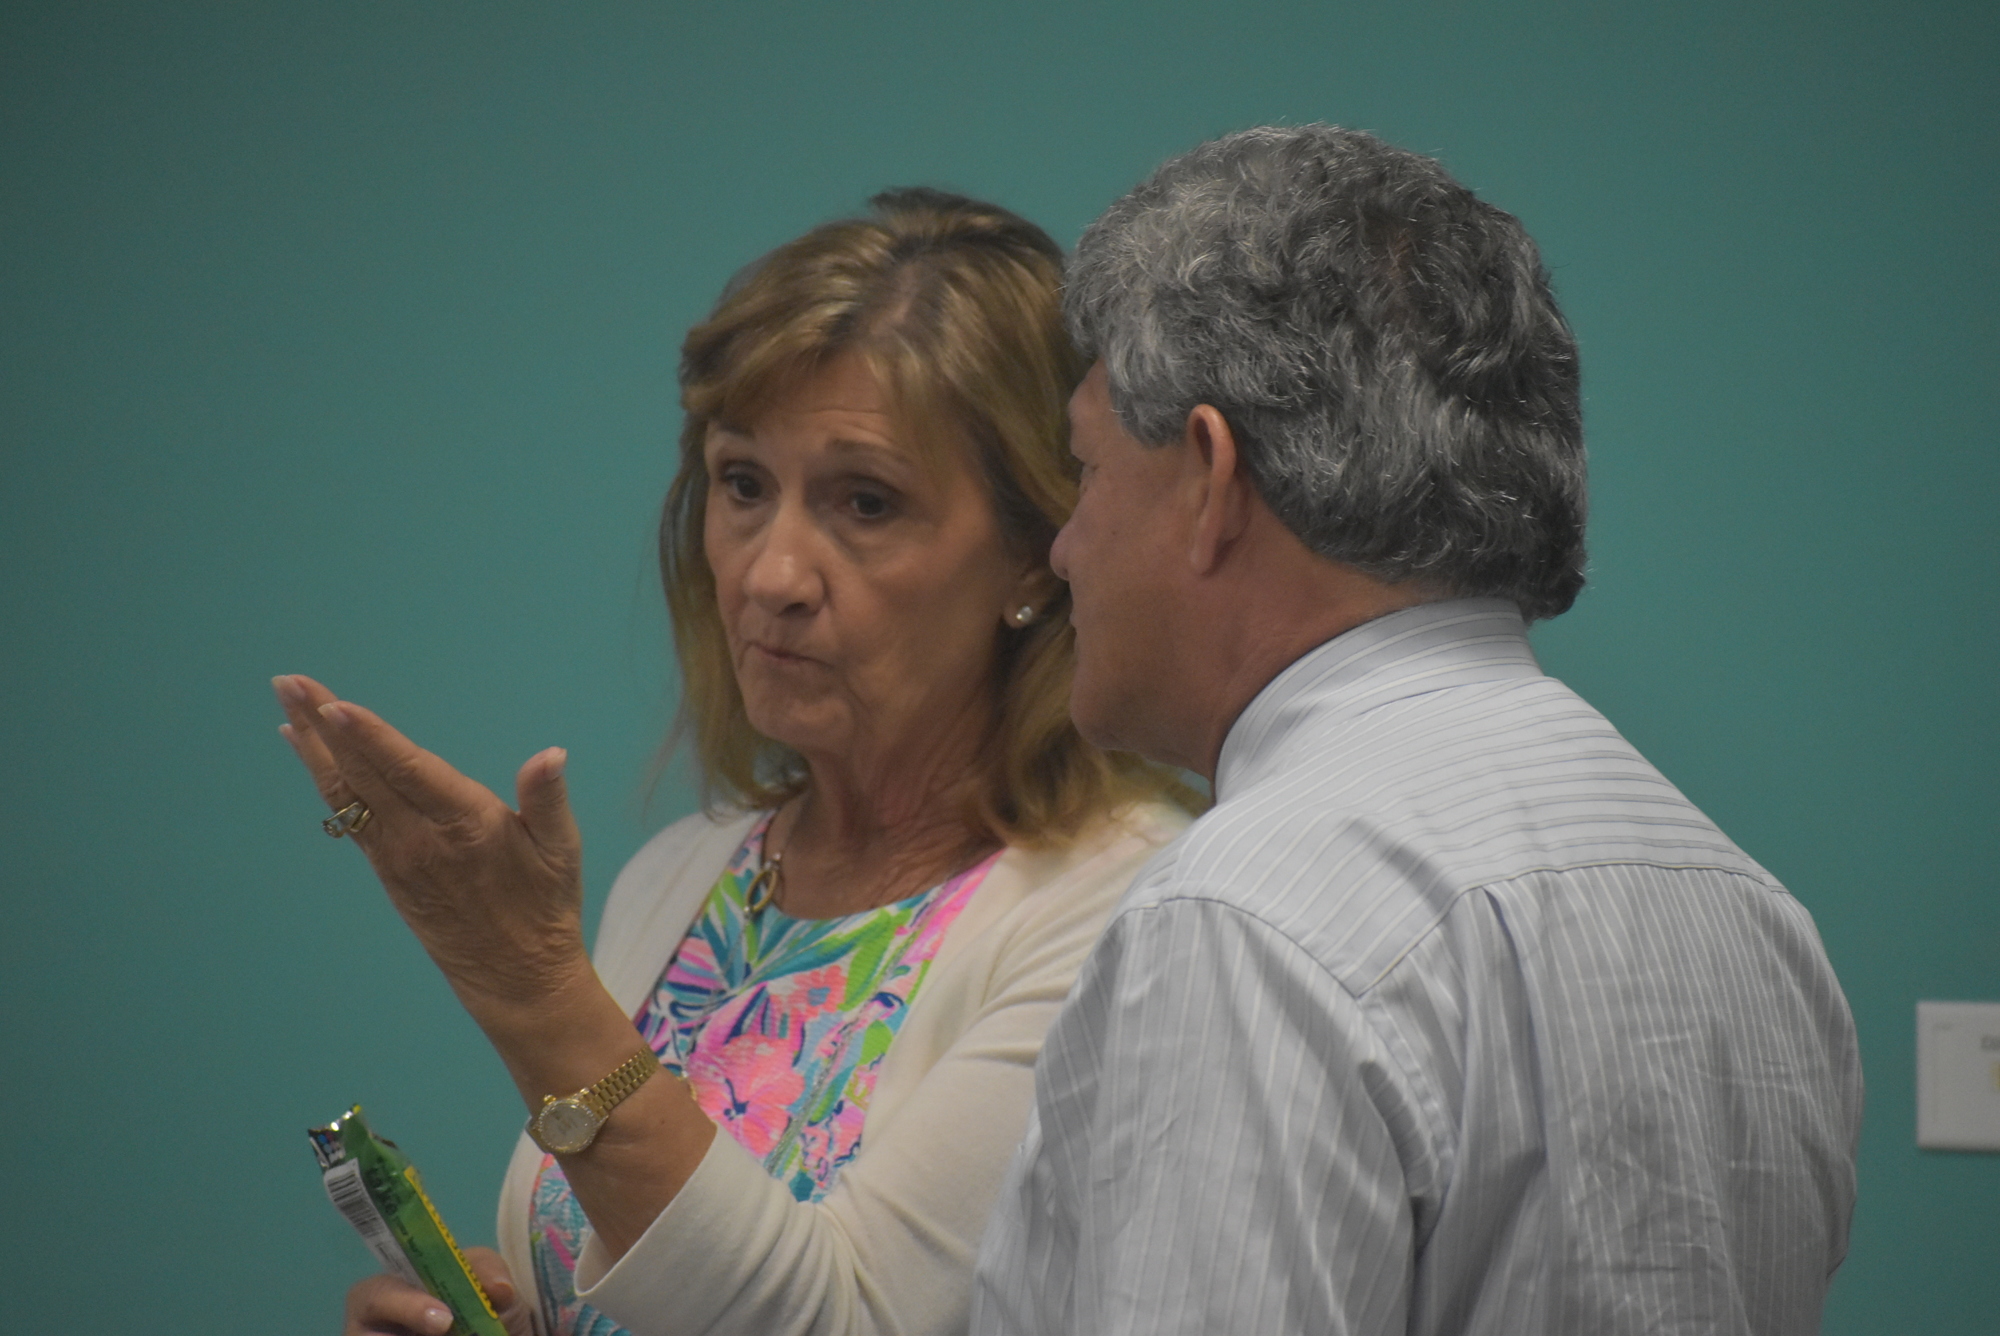 Manatee County Commissioner Vanessa Baugh, pictured with Administrator Scott Hopes, says her top priorities are roads — such as the extension of Lena Road and widening of Lorraine Road — and park amenities.